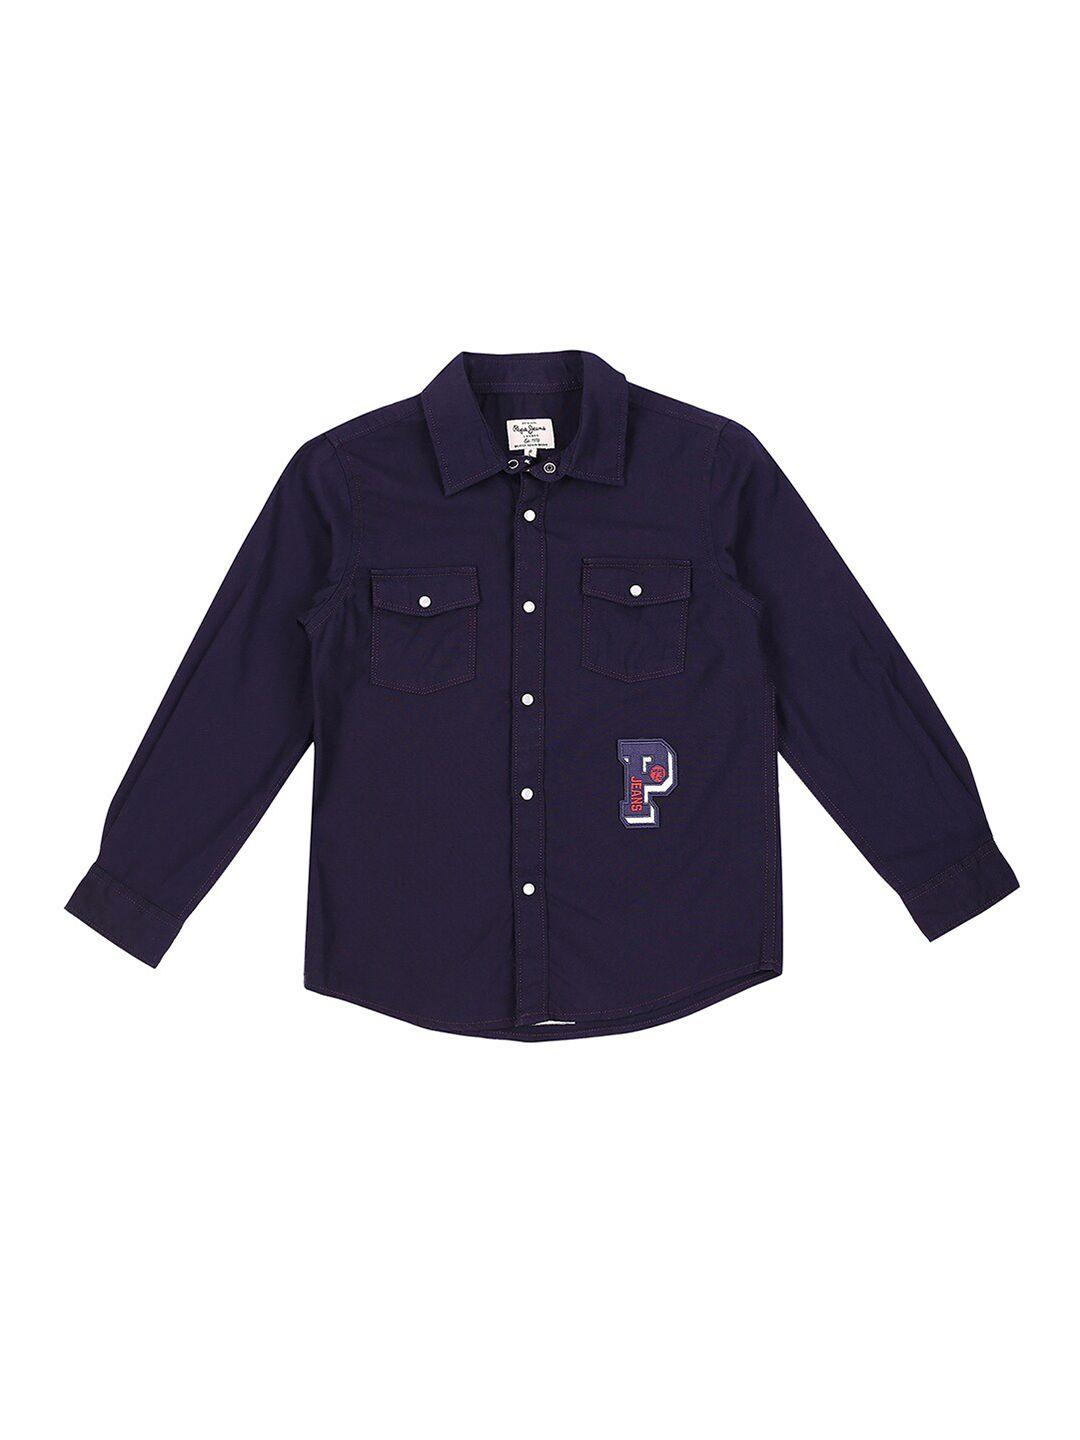 pepe-jeans-boys-navy-blue-casual-shirt